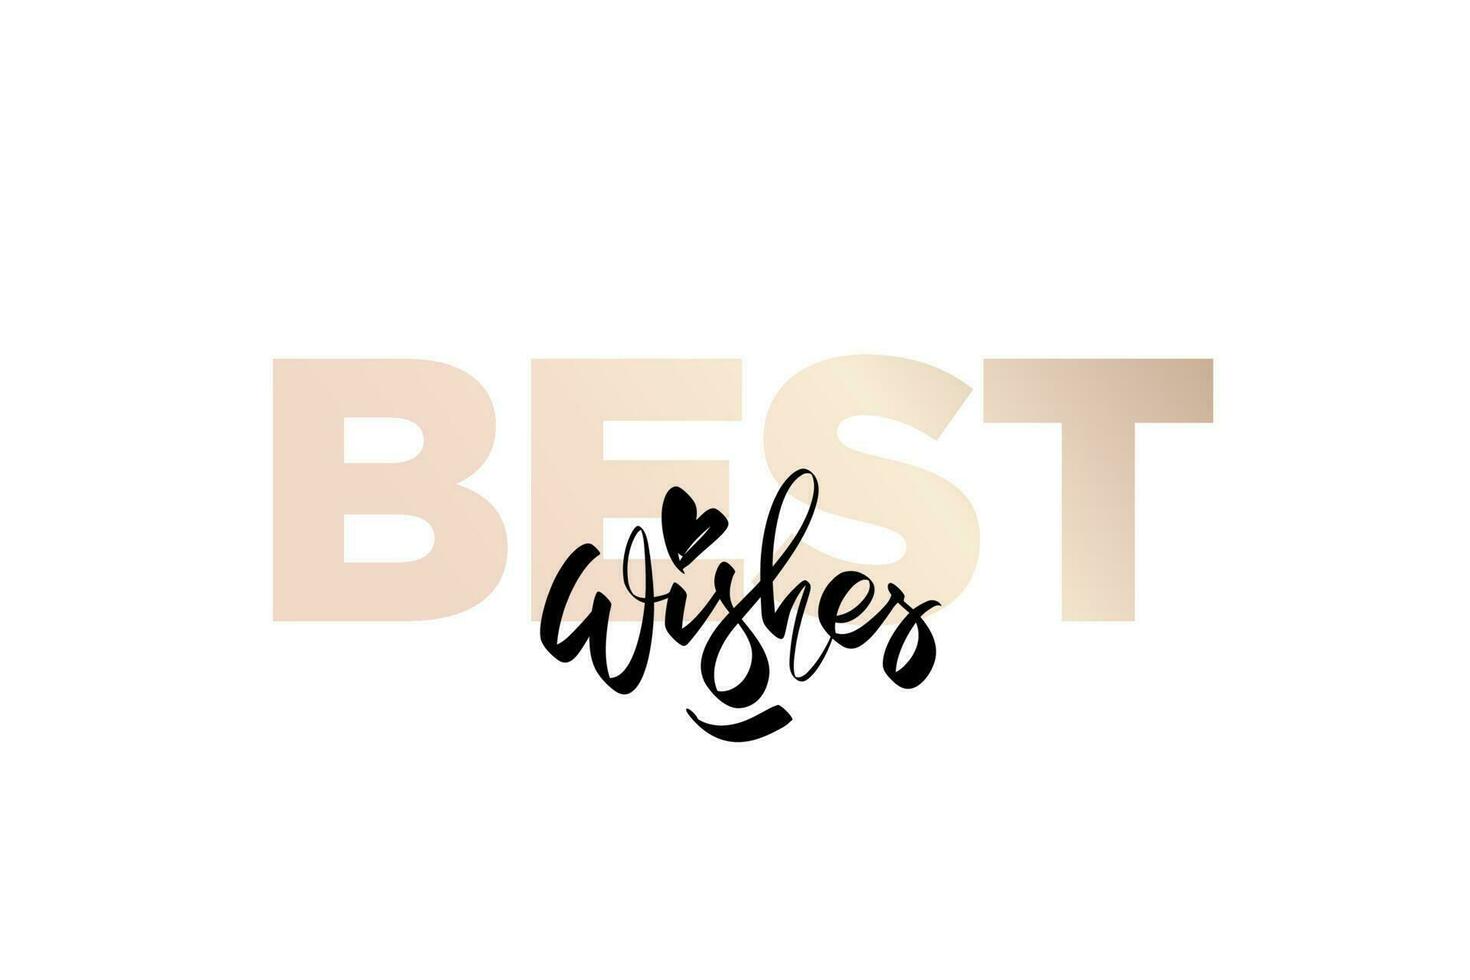 Best Wishes lettering. Handwritten modern calligraphy, brush painted letters with elegant text. Vector illustration. Template for T-shirt, decor, greeting card, poster or photo overlay.